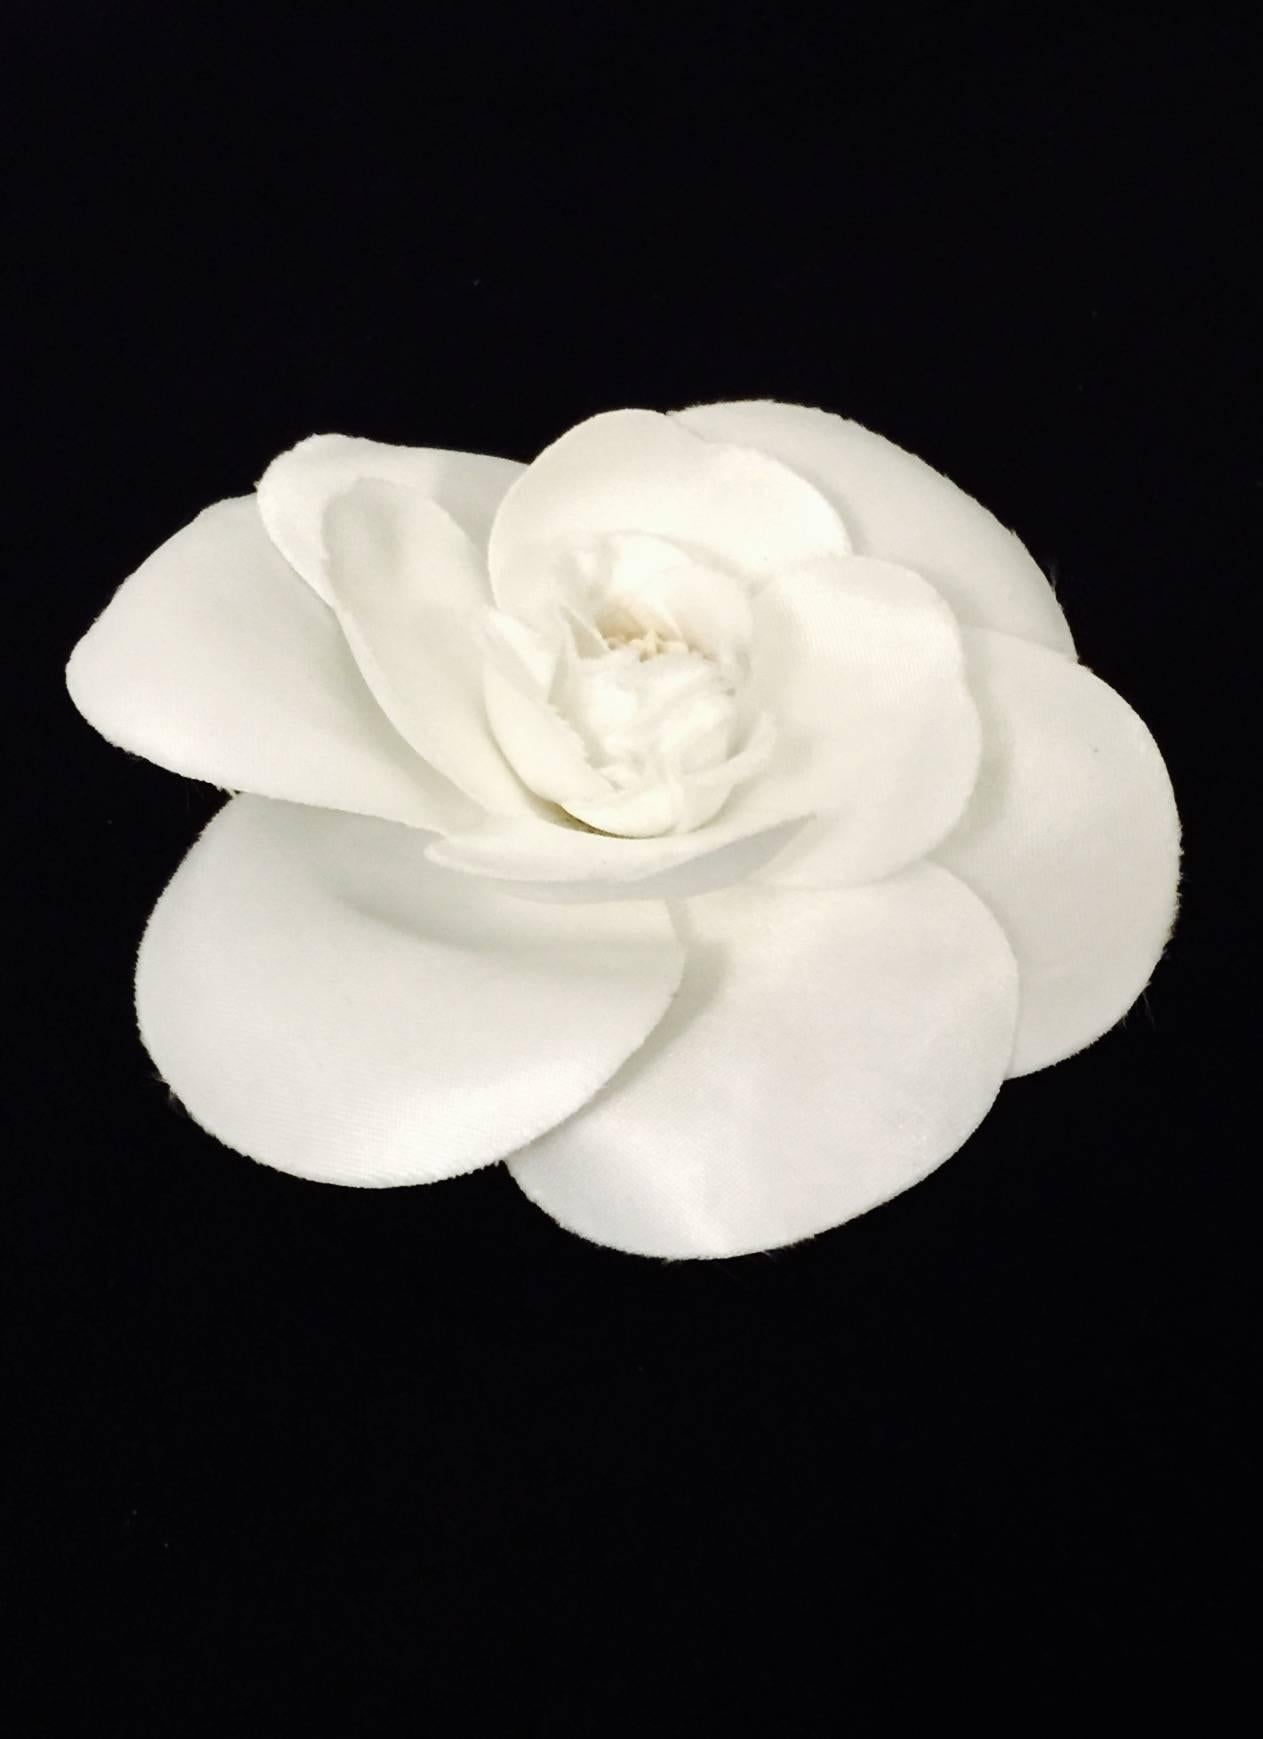 Chanel loved flowers...especially Camellias!  The Camellia, or "Chinese Rose", is a symbol of everlasting love and devotion.  Chanel's fascination with this particularly short blooming flower is evident...it is as part of Mademoiselle's